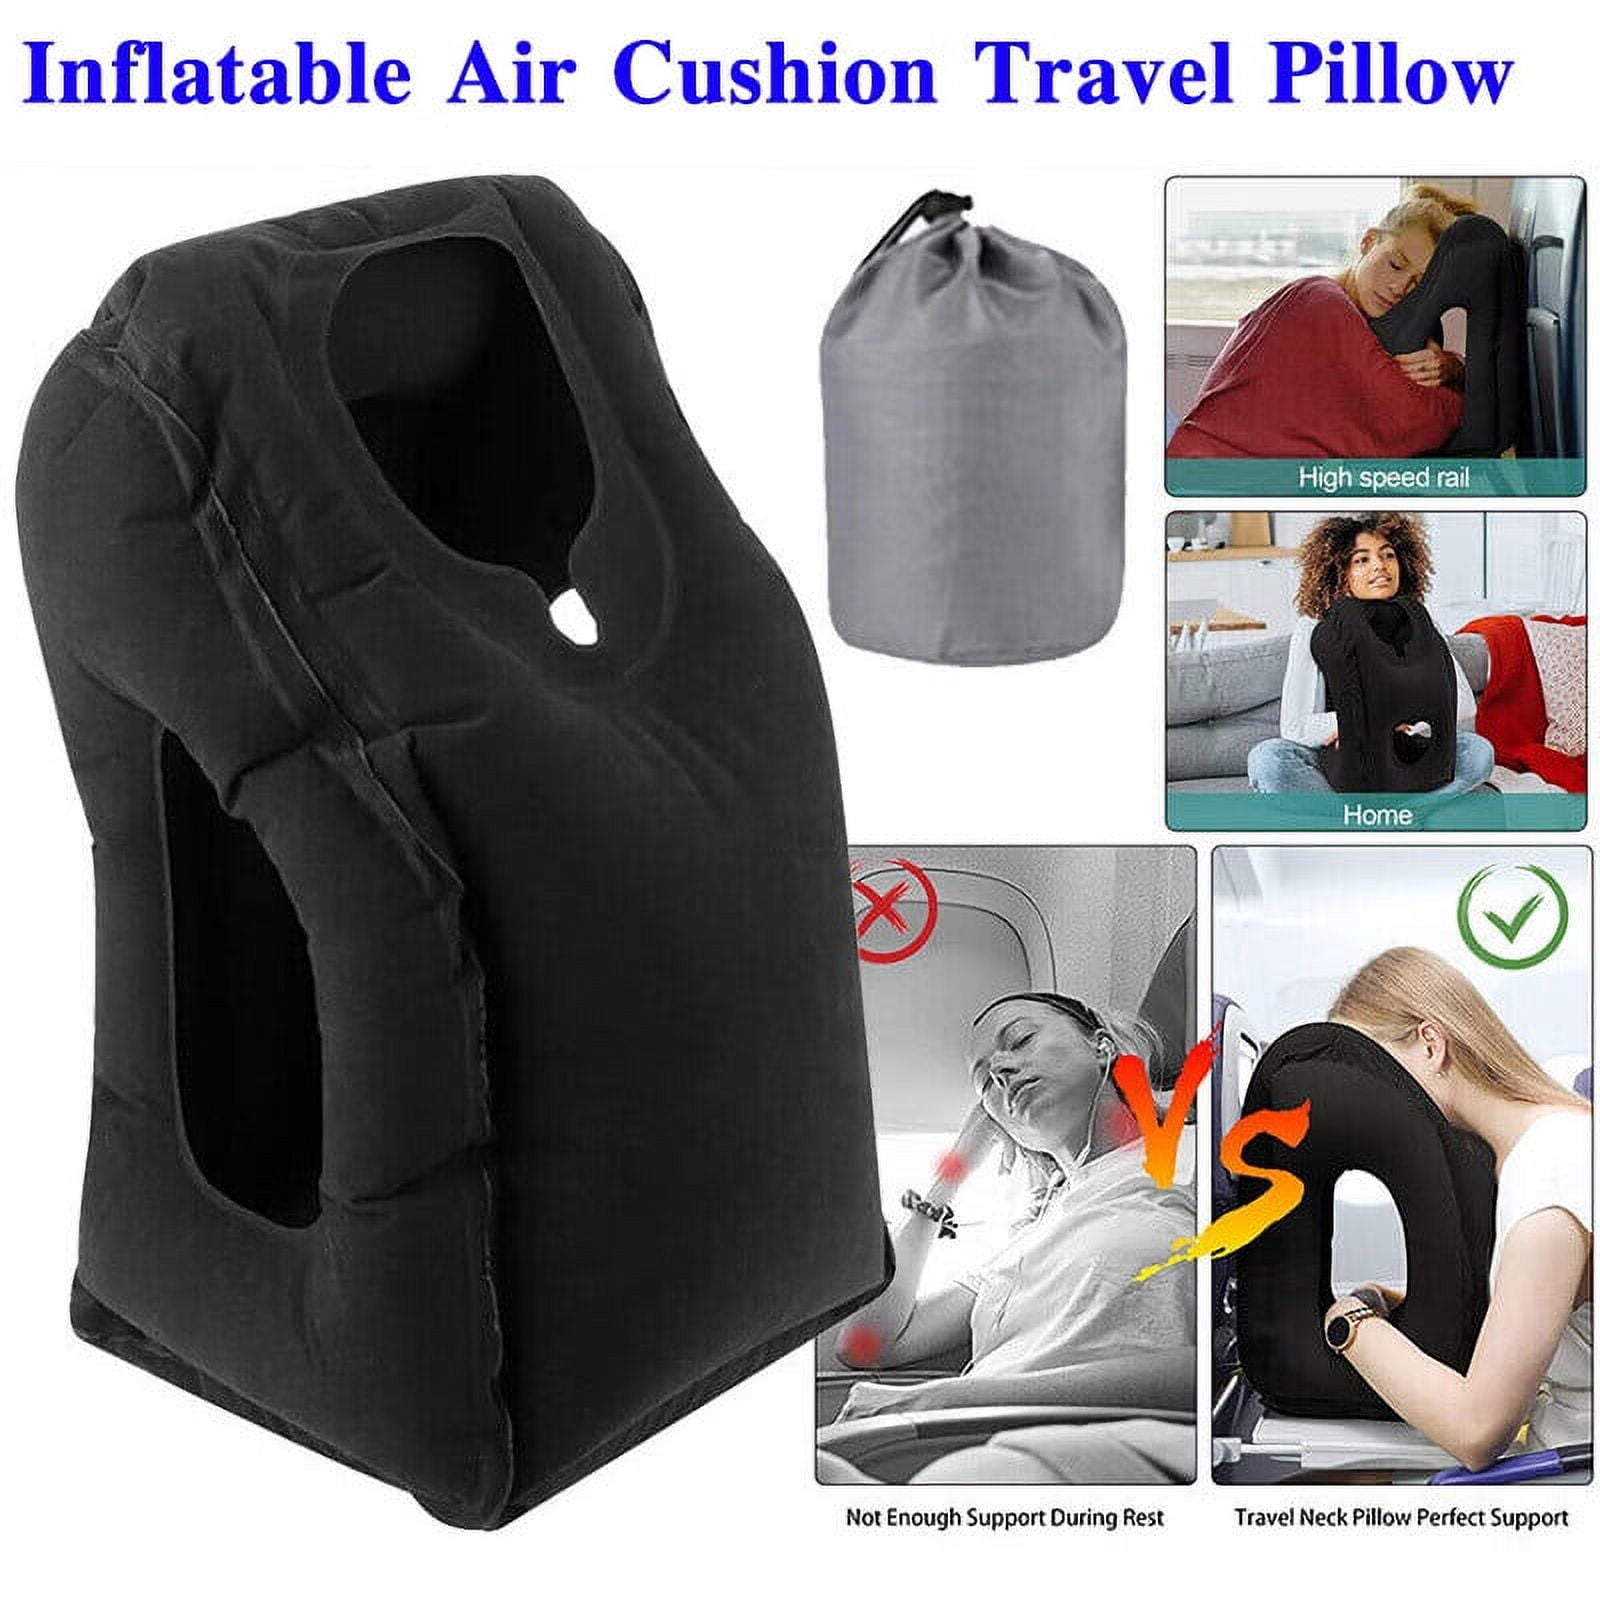 Inflatable Air Cushion Travel Pillow for Airplane Office Nap Rest Neck Head Chin Black, Size: 26